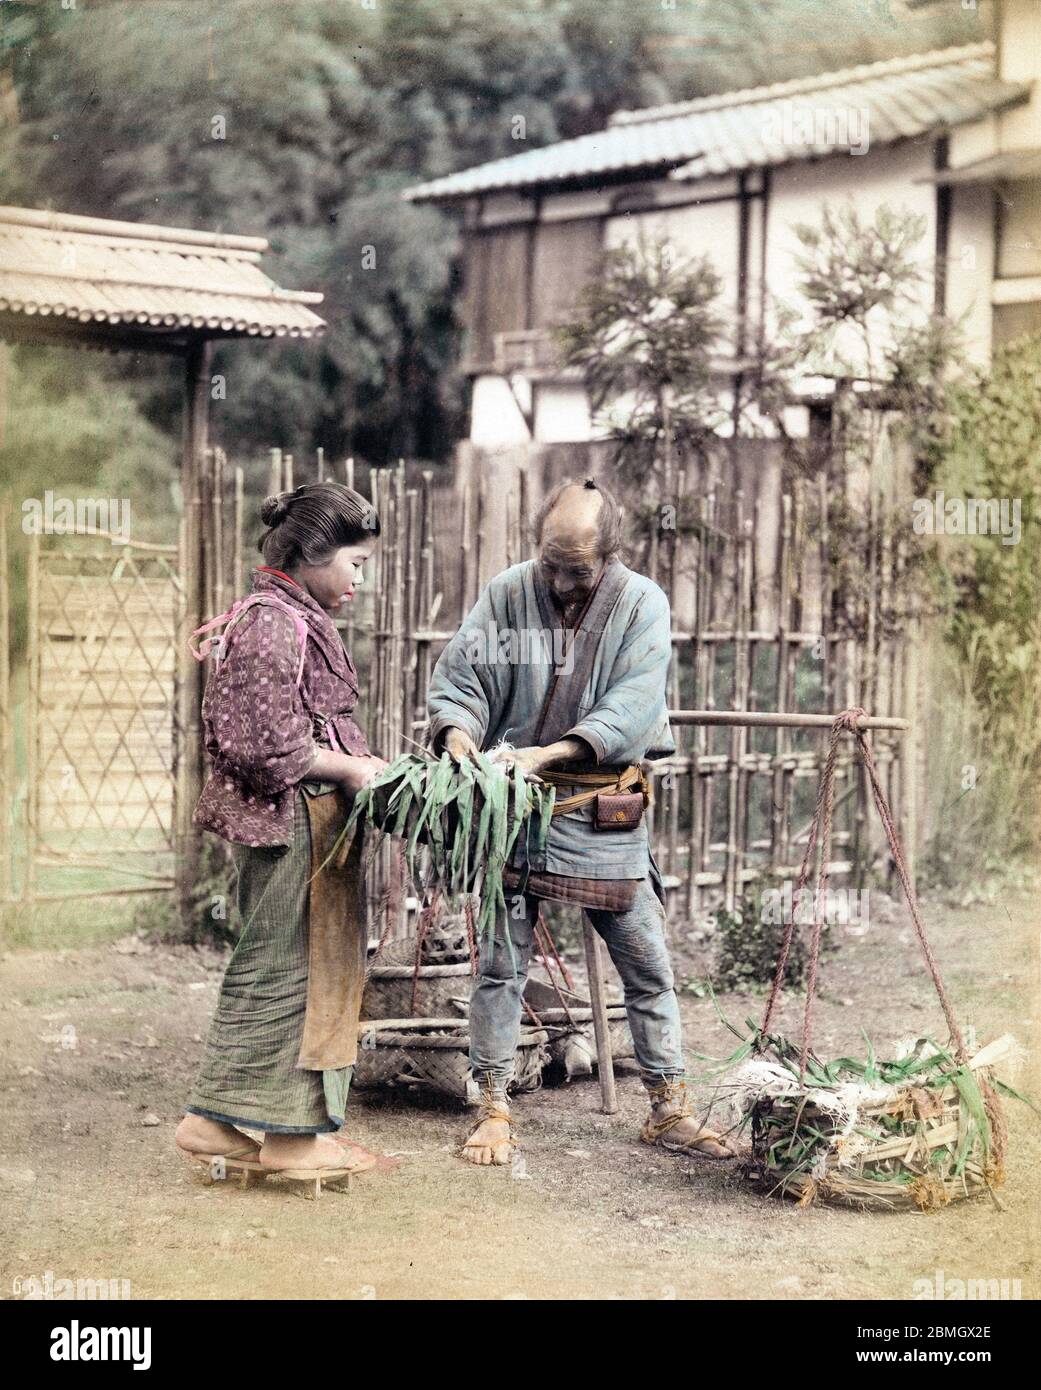 [ 1890s Japan - Japanese Vegetable Vendor ] —   A street vendor with baskets of vegetables meets a customer on the street.  Japanese streets used to be full of vendors peddling everything from food to baskets to medicine.  19th century vintage albumen photograph. Stock Photo